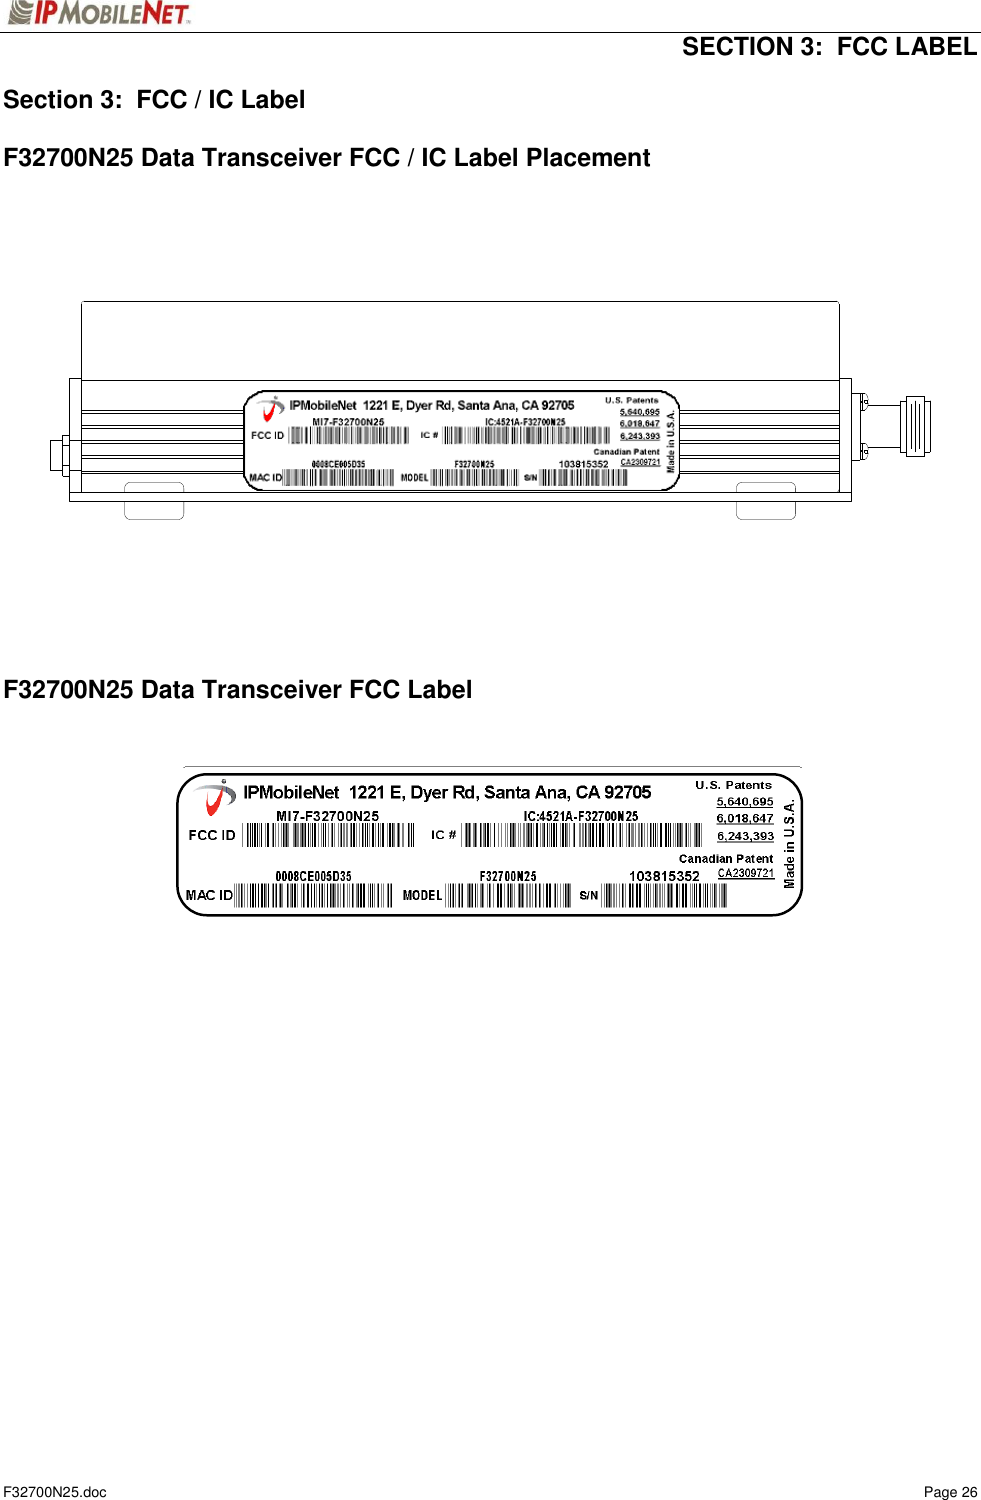   SECTION 3:  FCC LABEL  F32700N25.doc    Page 26 Section 3:  FCC / IC Label  F32700N25 Data Transceiver FCC / IC Label Placement           F32700N25 Data Transceiver FCC Label          